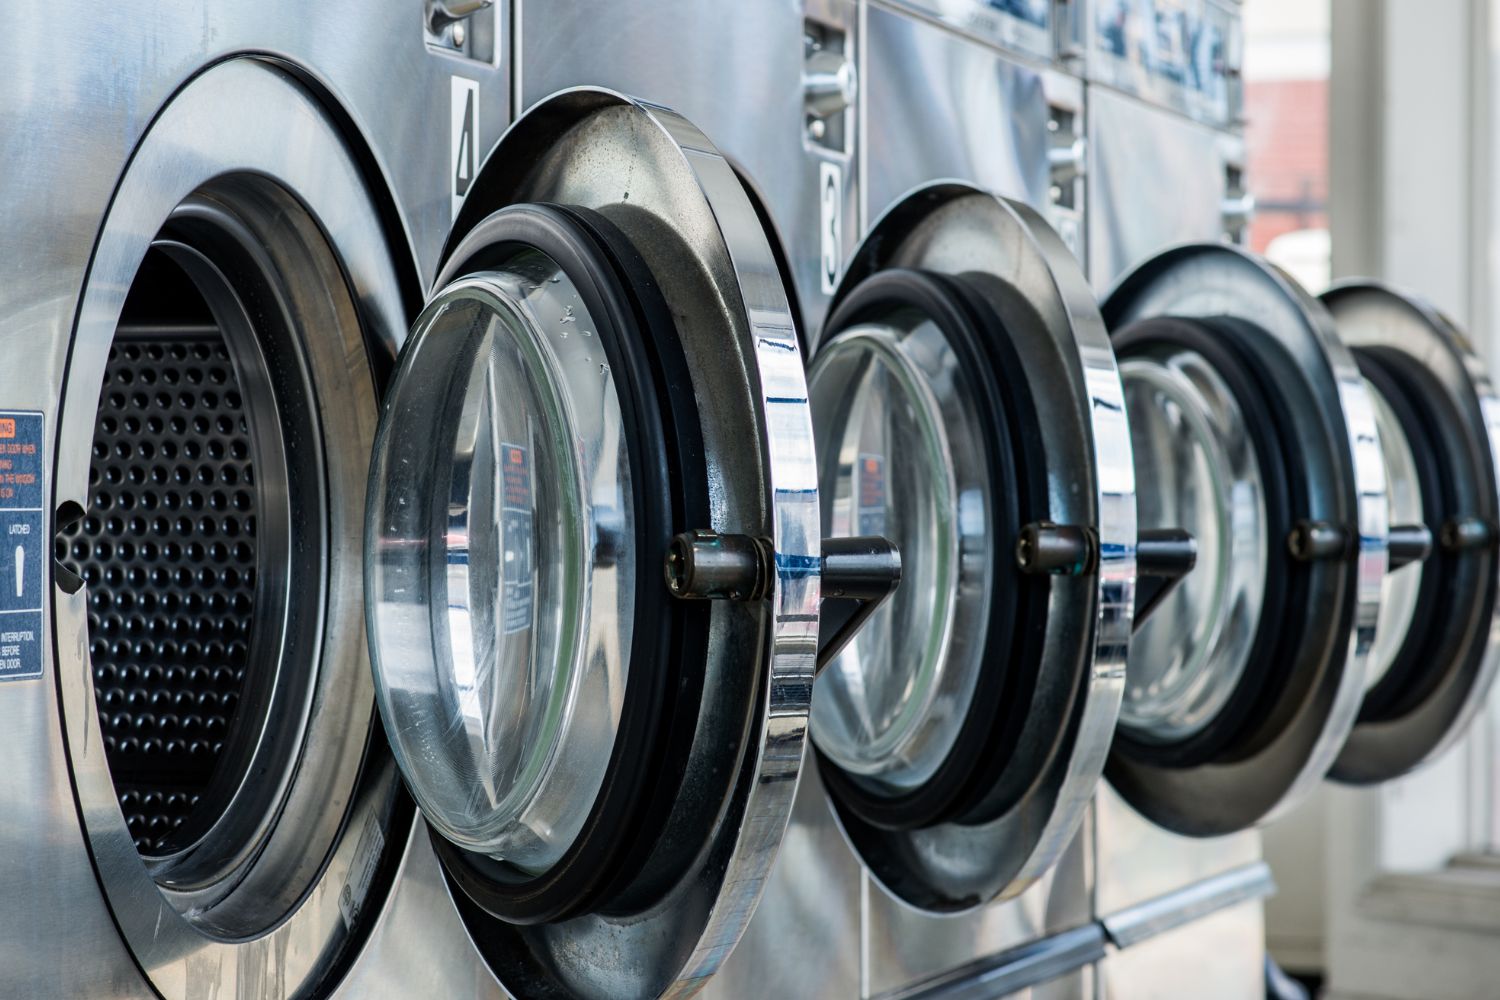 How to choose the best commercial laundry equipment brand?